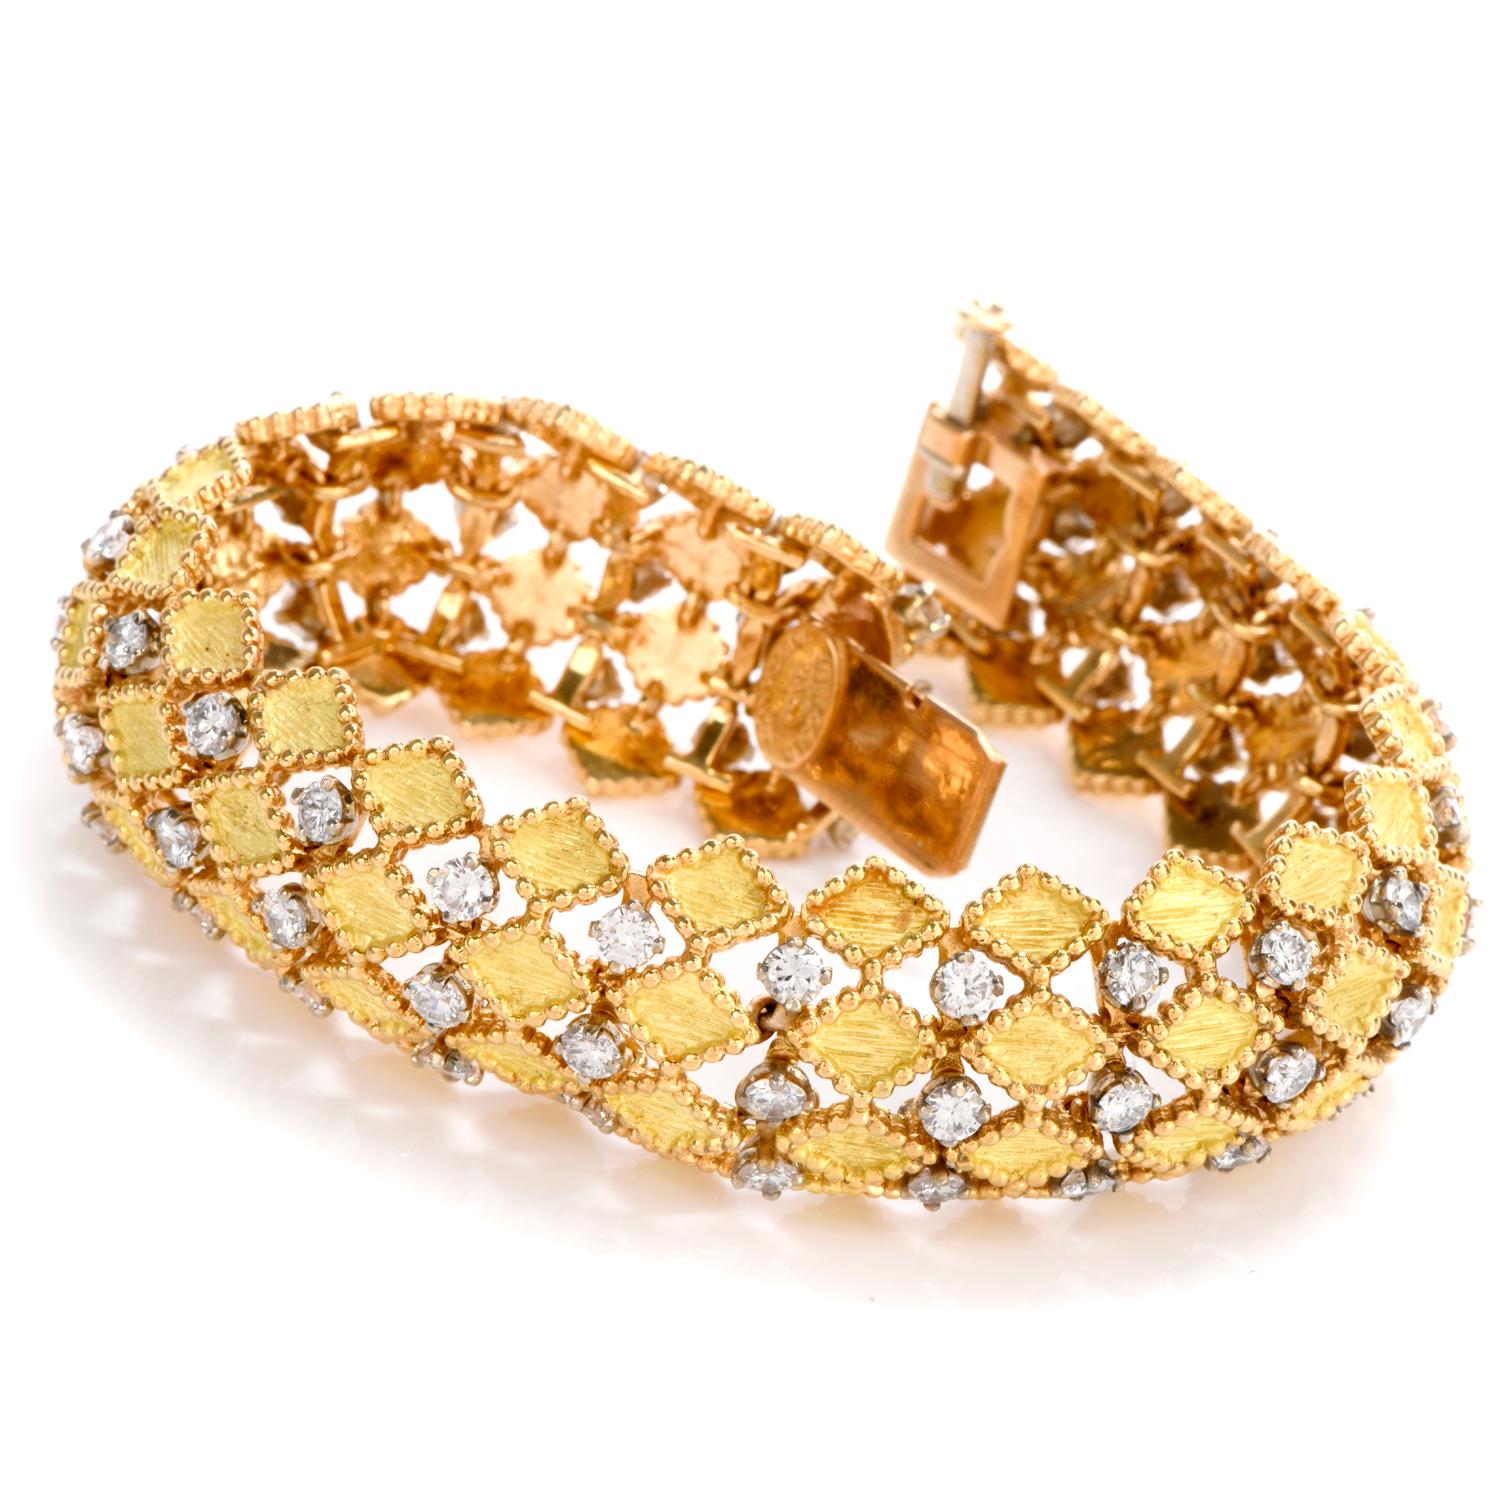 This exquisite 1960's French made Vintage domed Diamond bracelet was crafted in 18k gold and features 69  high quality round brilliant diamonds at an approximate weight of 6.50 carats and are of
G-H color and VS1-VS2 clarity. It features a hidden